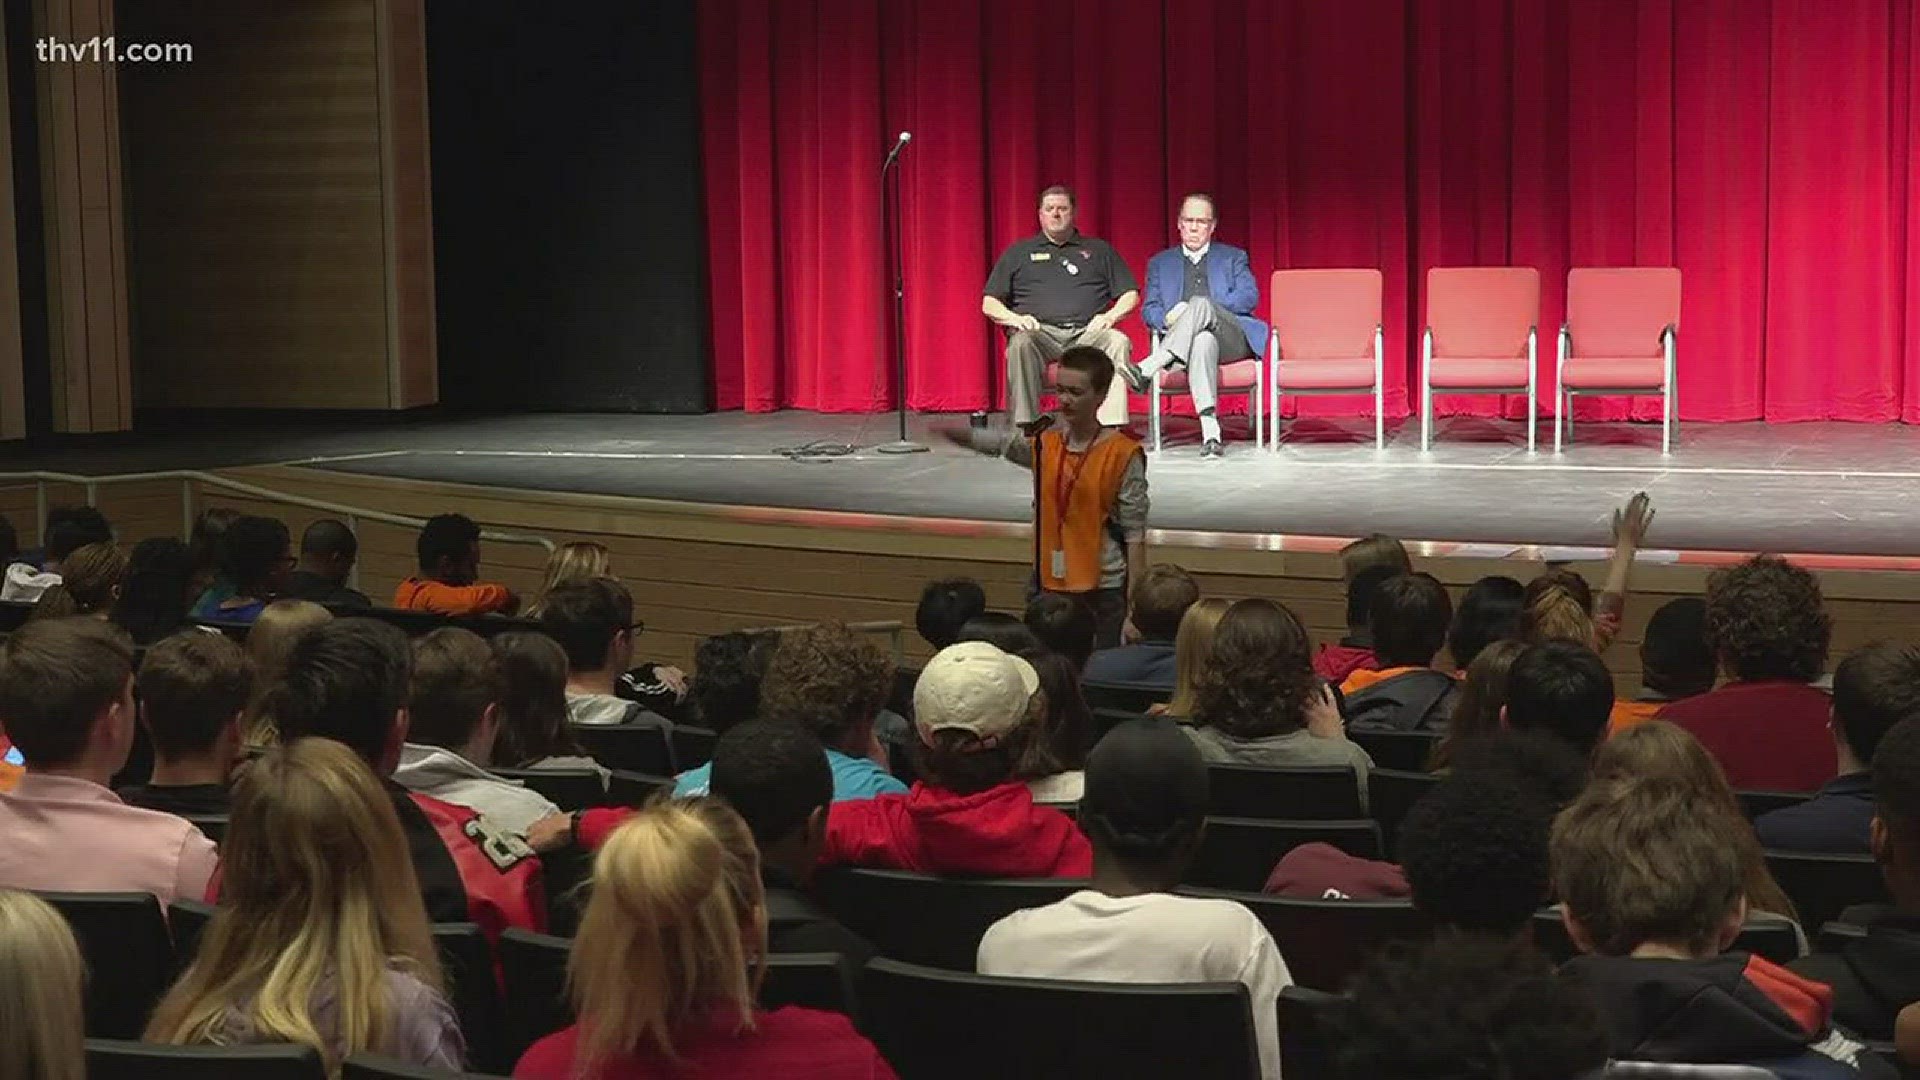 Rather than participate in the March 14 walk out that protested gun violence, Maumelle High students attended a student-led assembly where they discussed the issues.